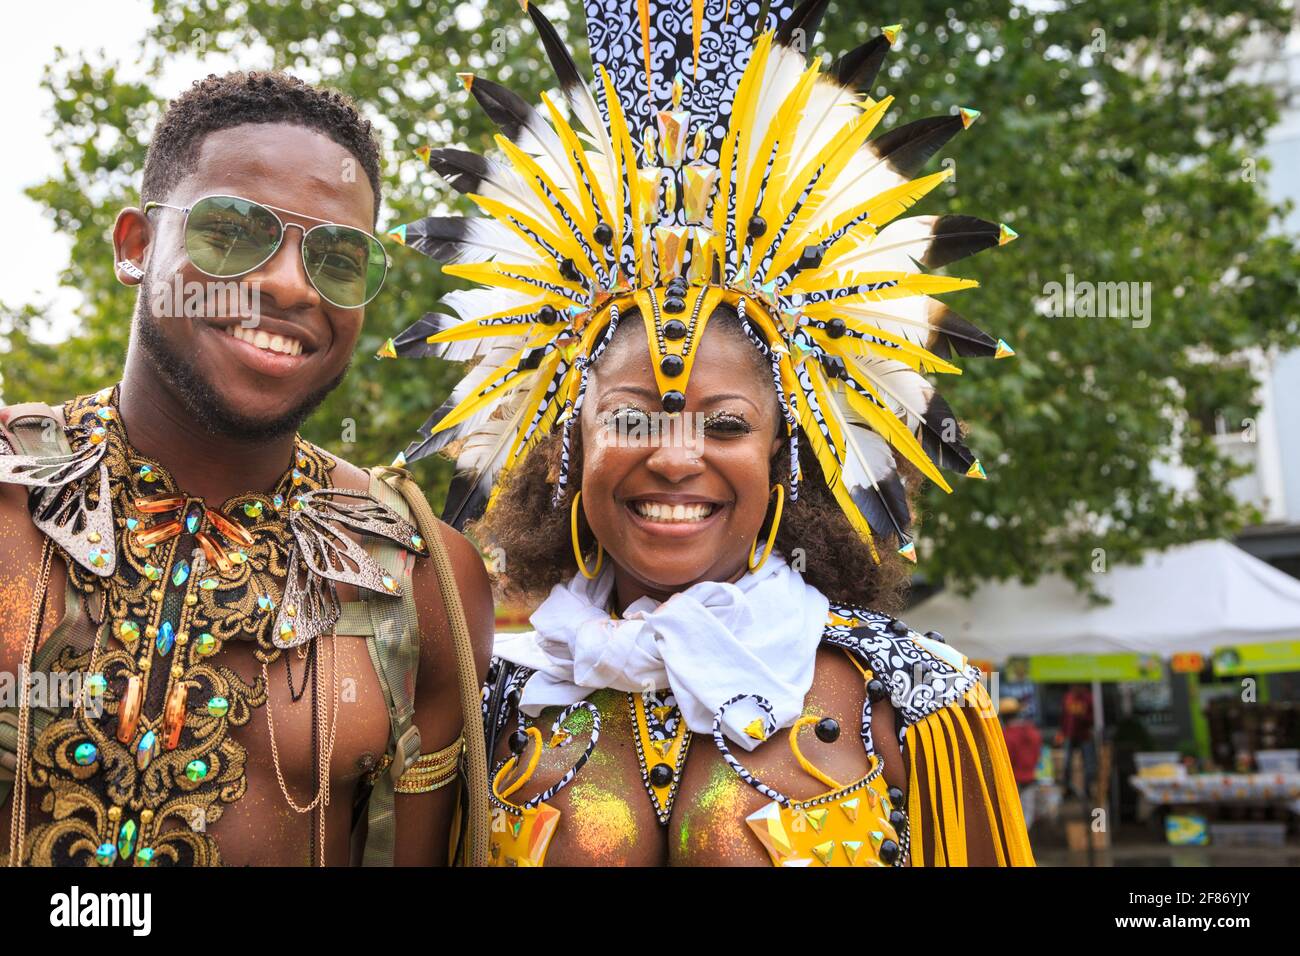 Afro-Caribbean carnival participants in salsa costume, smiling at ...